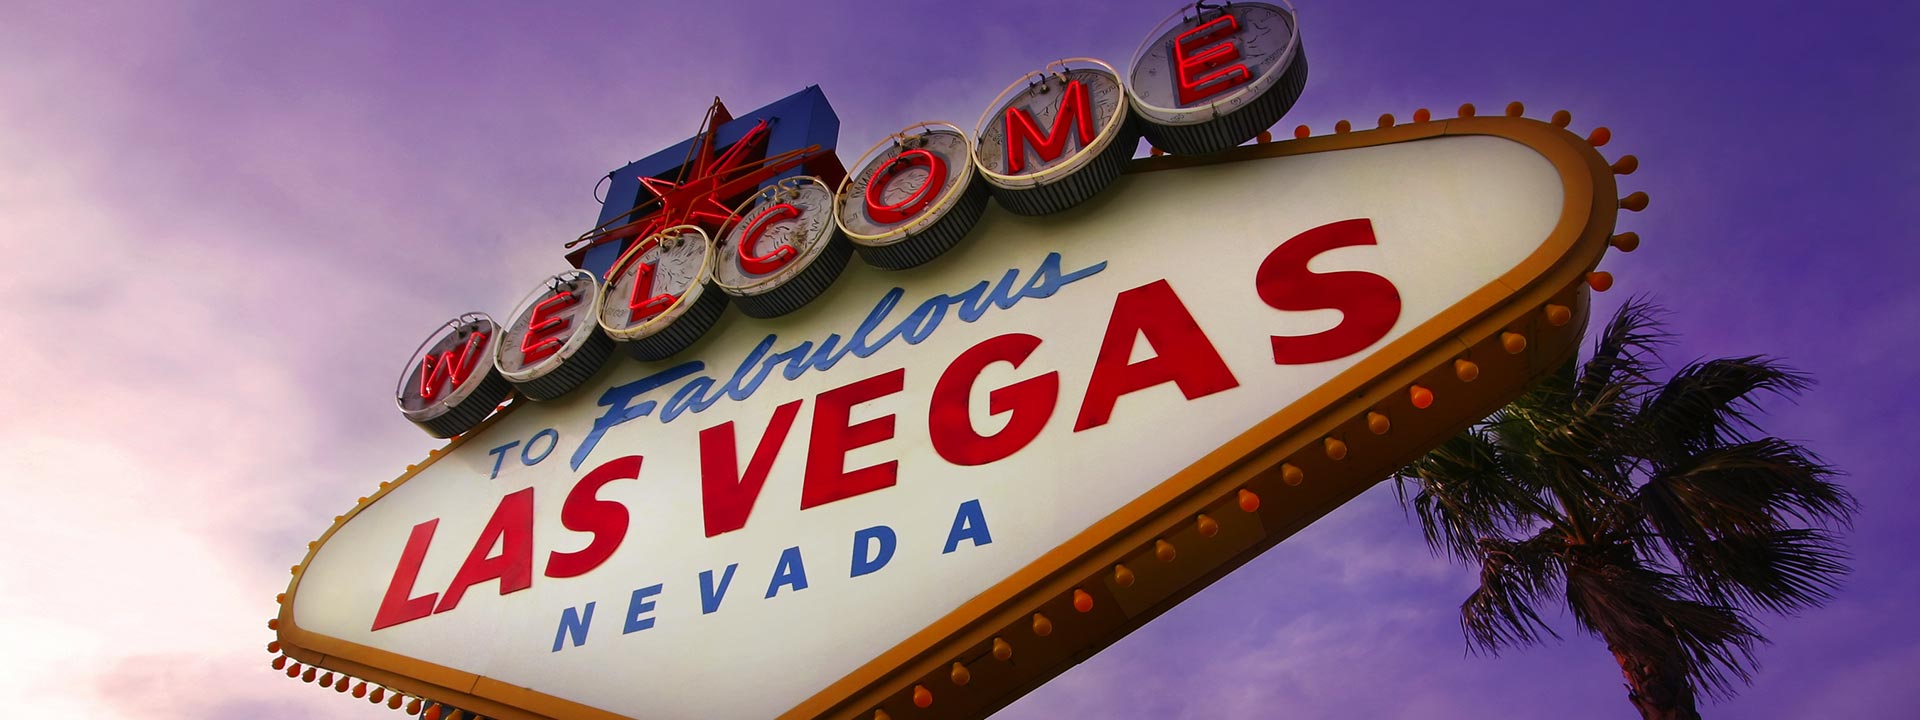 Things to do in Las Vegas during the day,